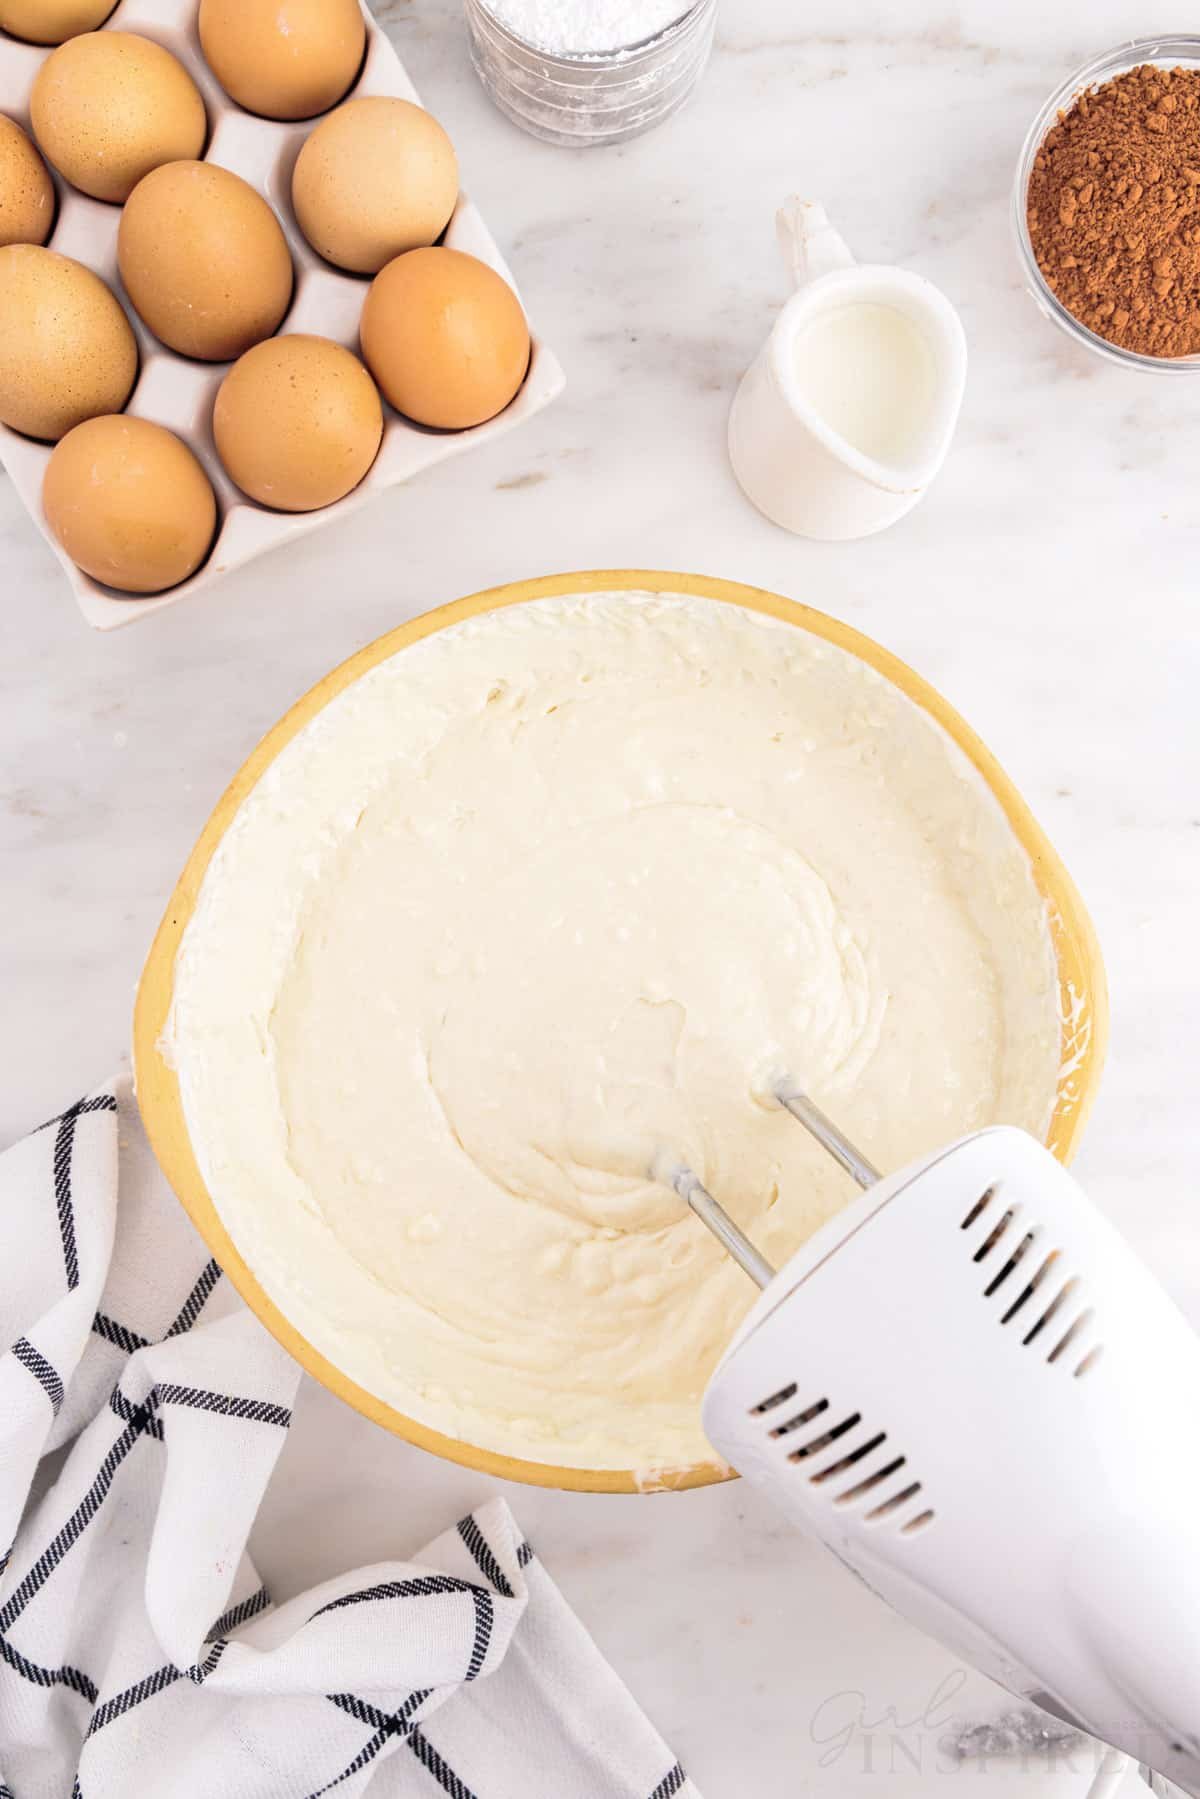 Bowl with vanilla cake mix batter with electric mixer, checkered linen, tray of eggs, small jug of milk, small bowl of cocoa  powder, jug of sour cream, on a marble countertop.